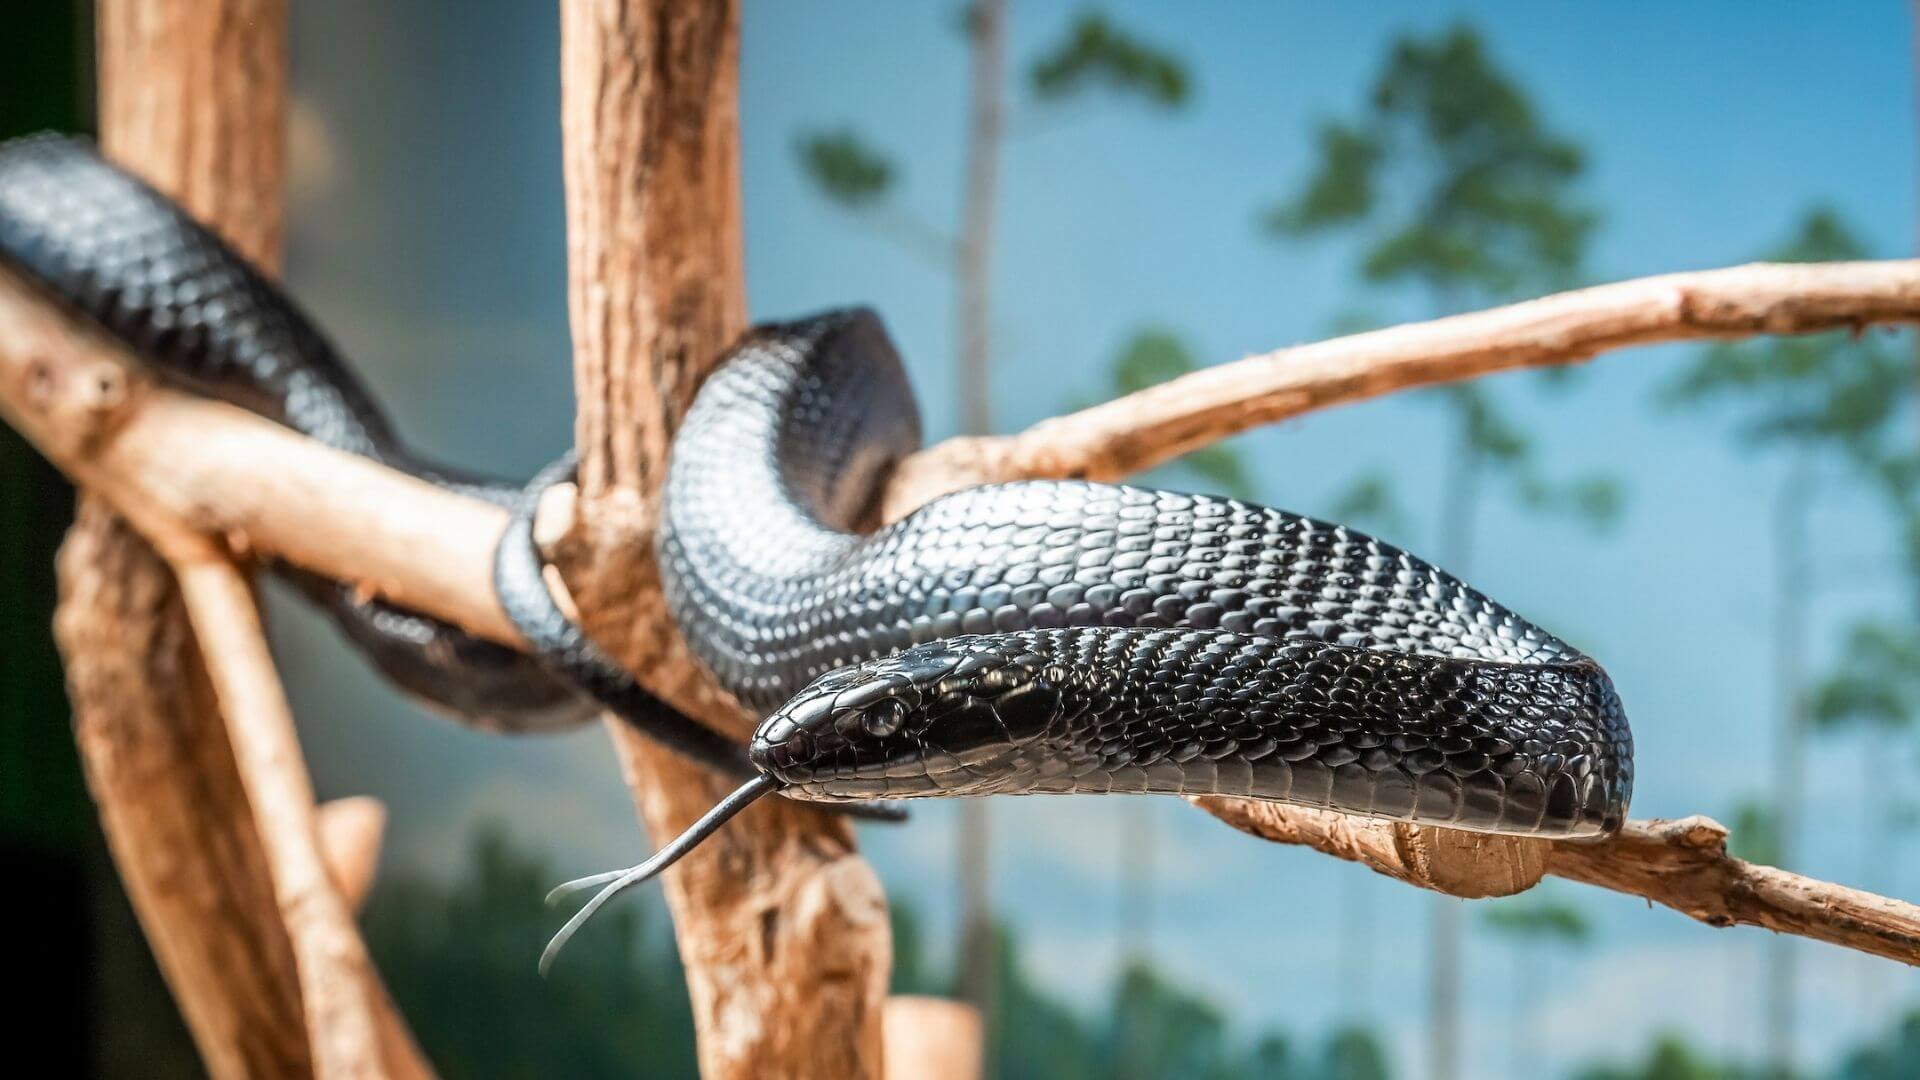 Can Snakes Be Venomous AND Poisonous? - Orlando Science Center